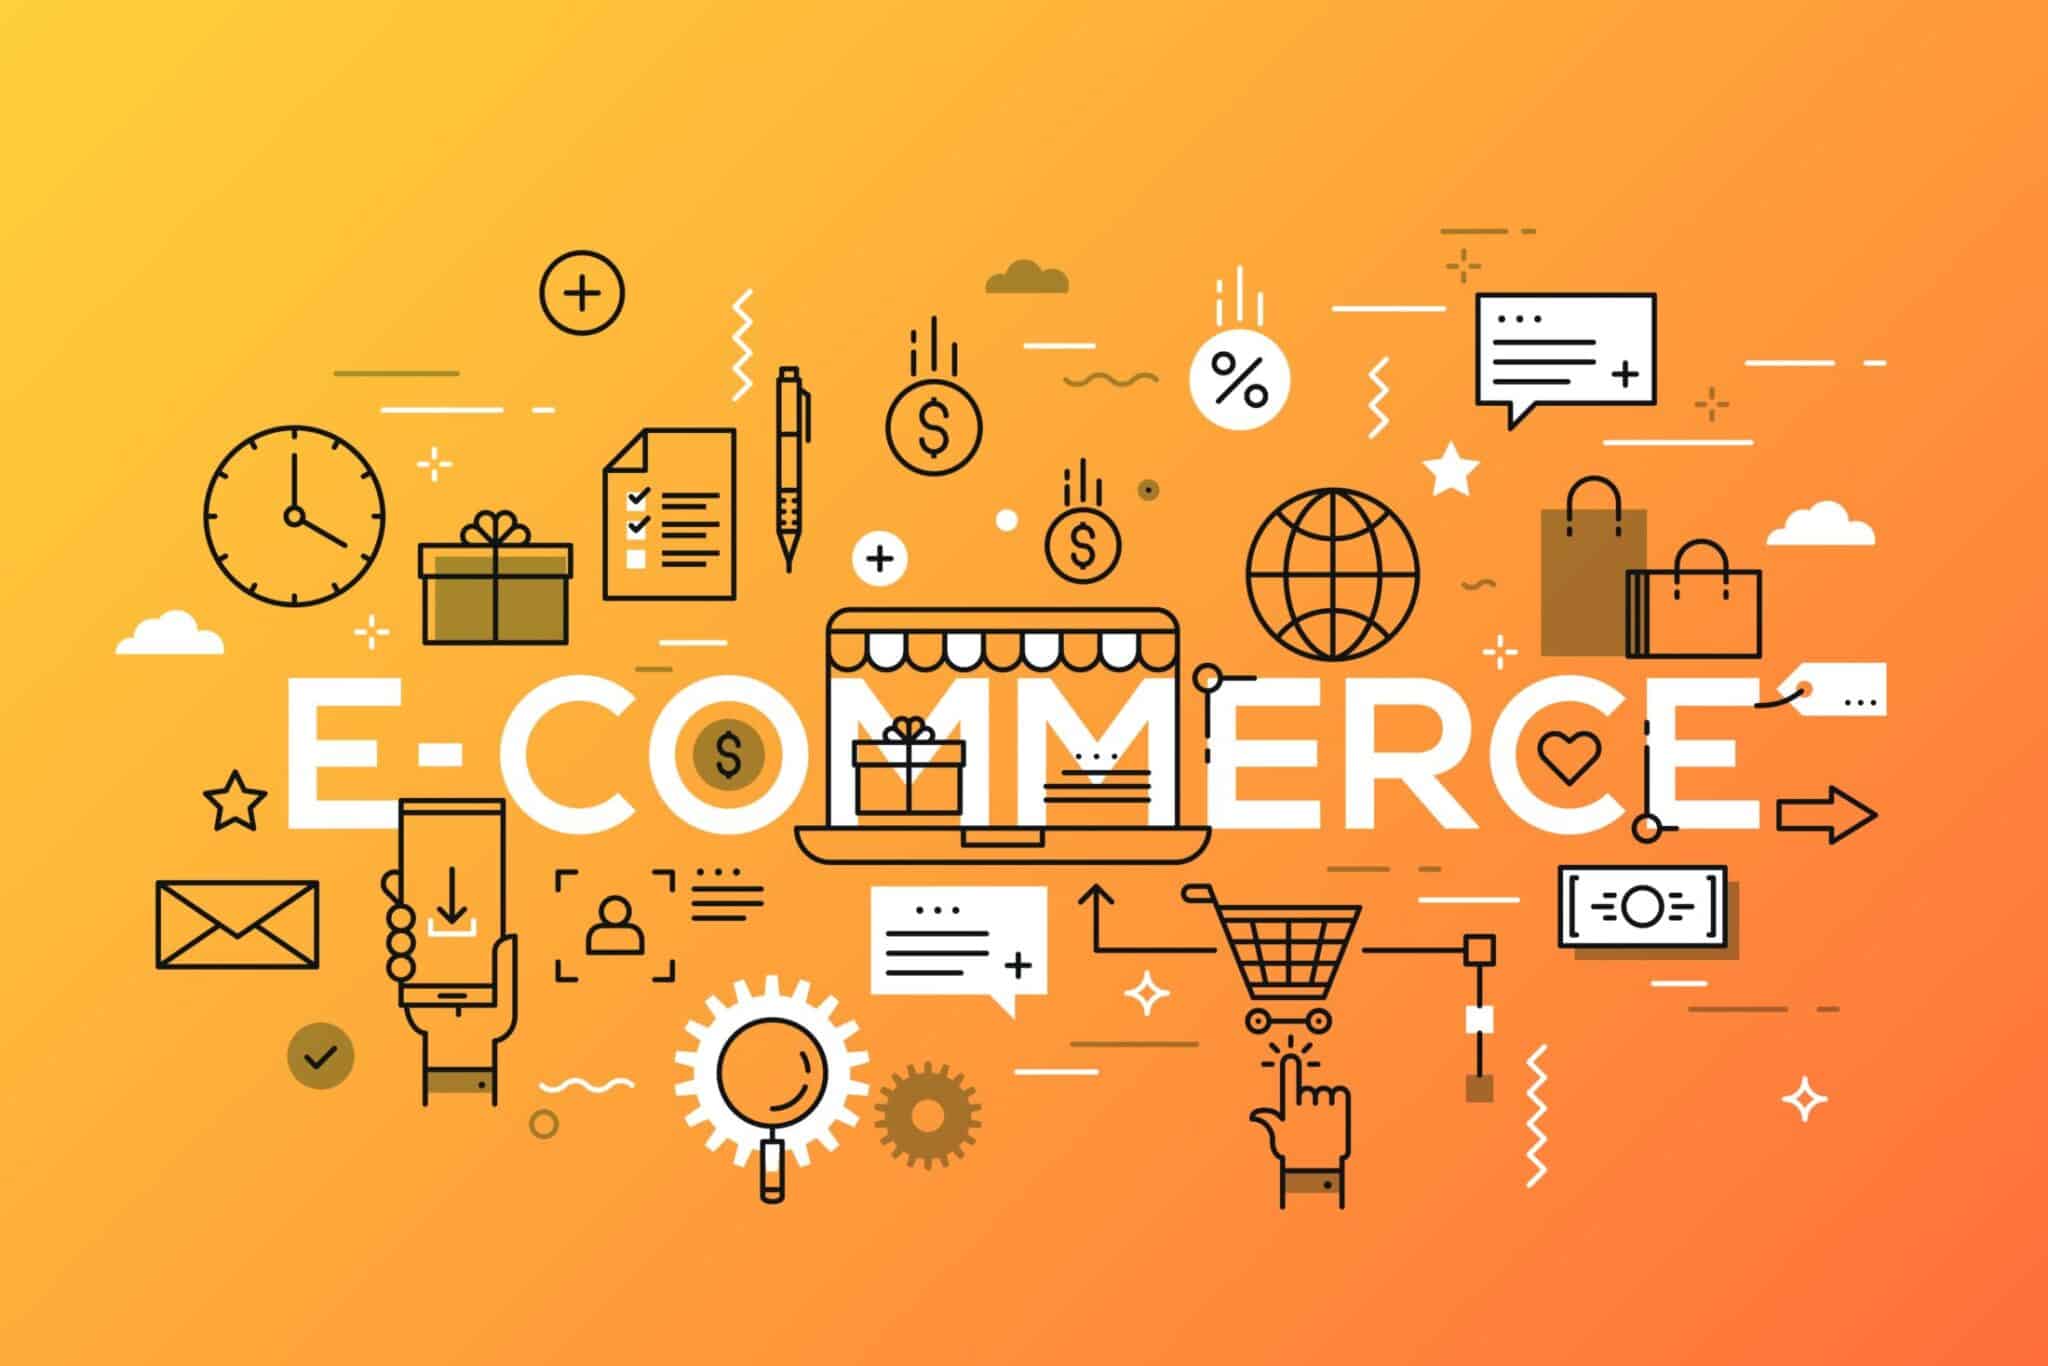 7 Mistakes To Avoid When Hiring An E-commerce Director